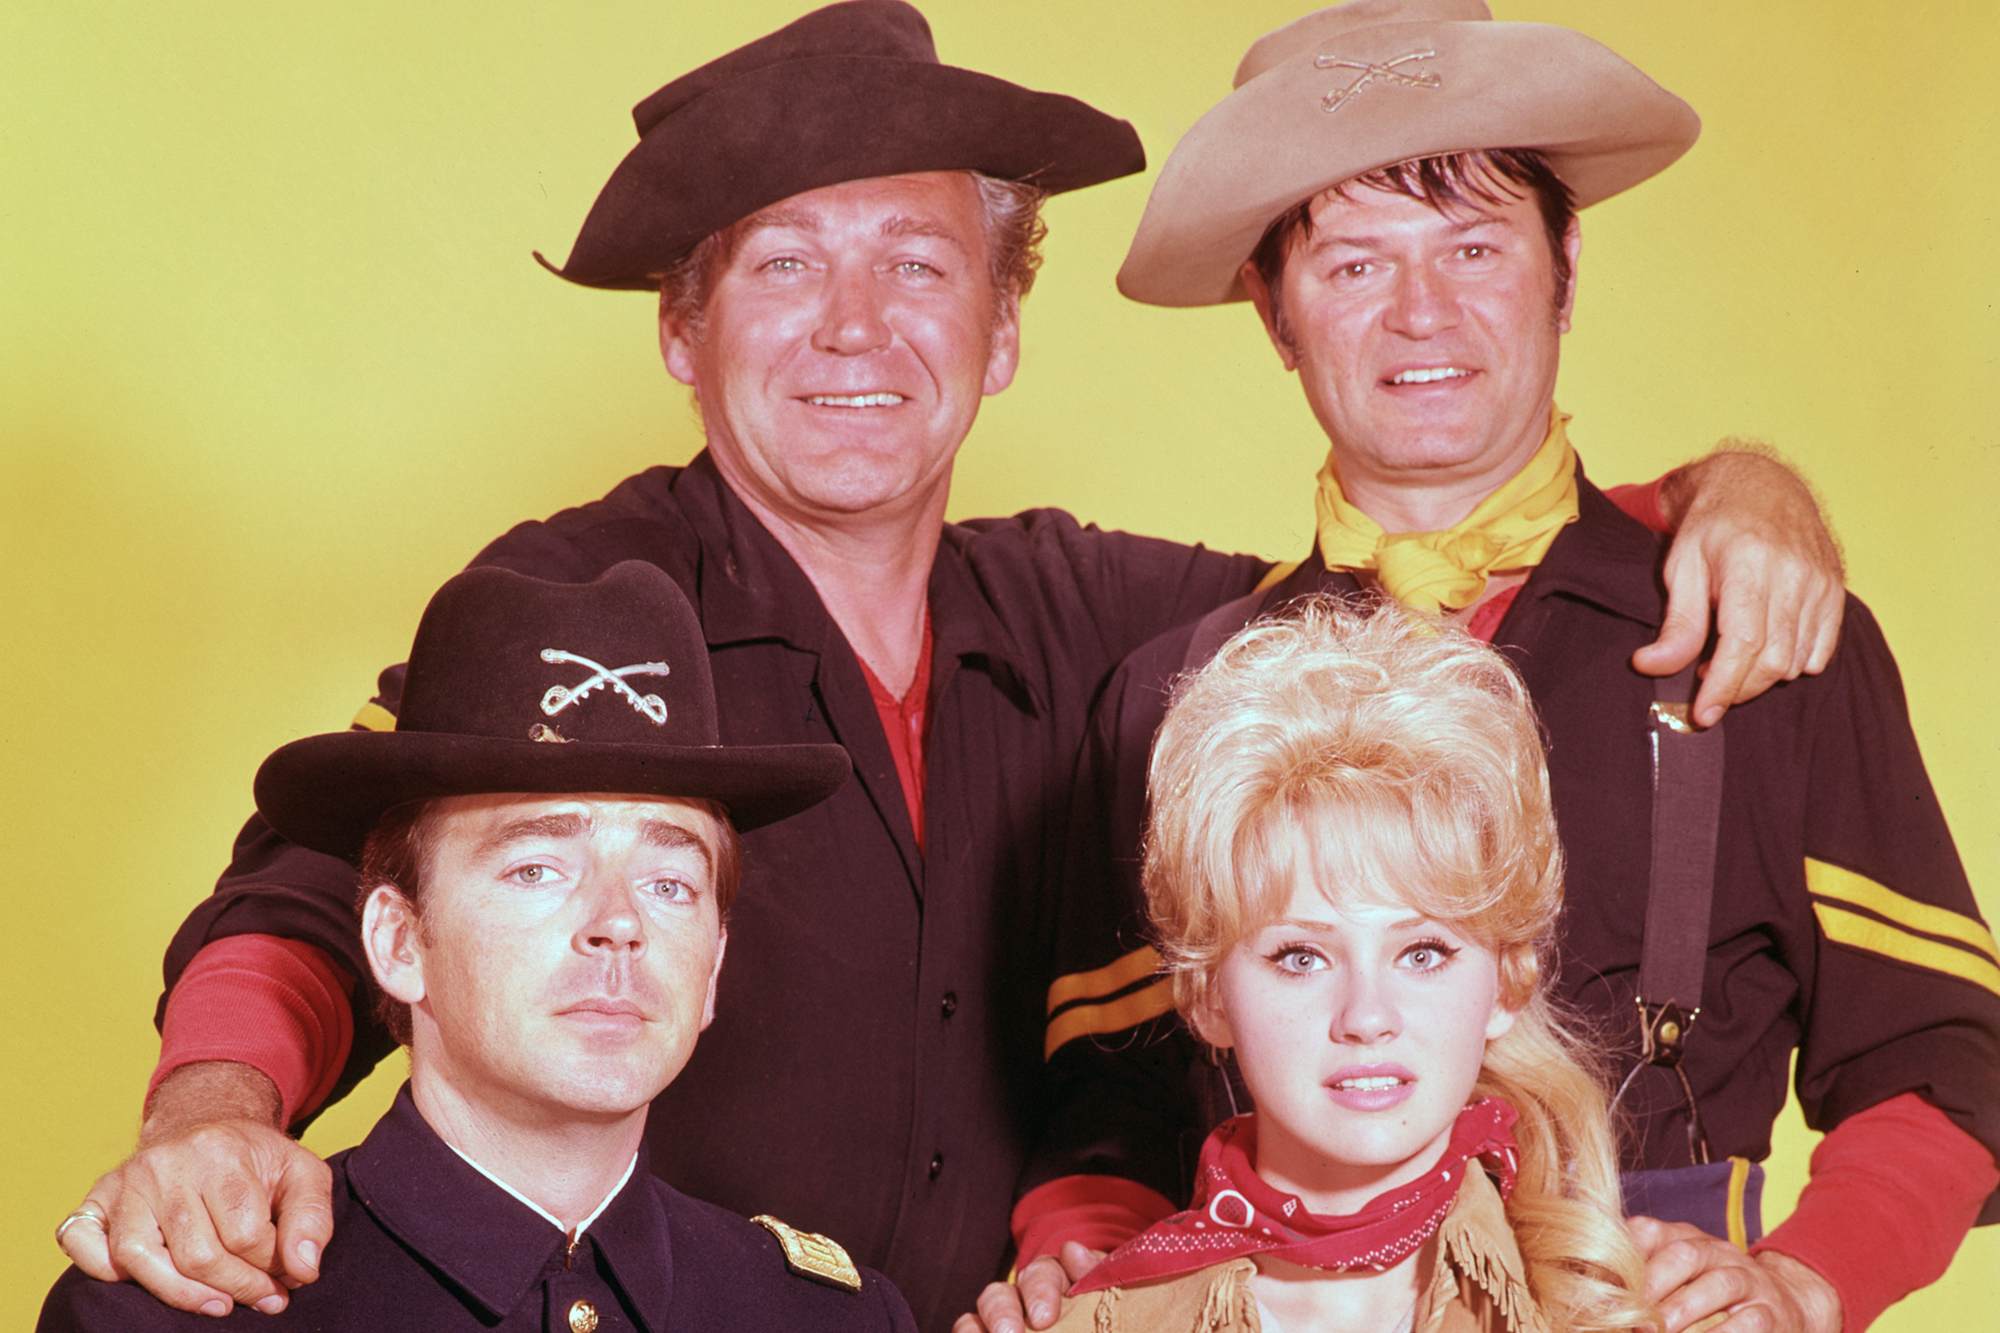 'F Troop' Ken Berry as Captain Wilton Parmenter, Forrest Tucker as Sgt Morgan O'Rourke, Larry Storch as Corporal Randolph Agarn, and Melody Patterson as Wrangler Jane posing in Western costumes in front of a yellow background.